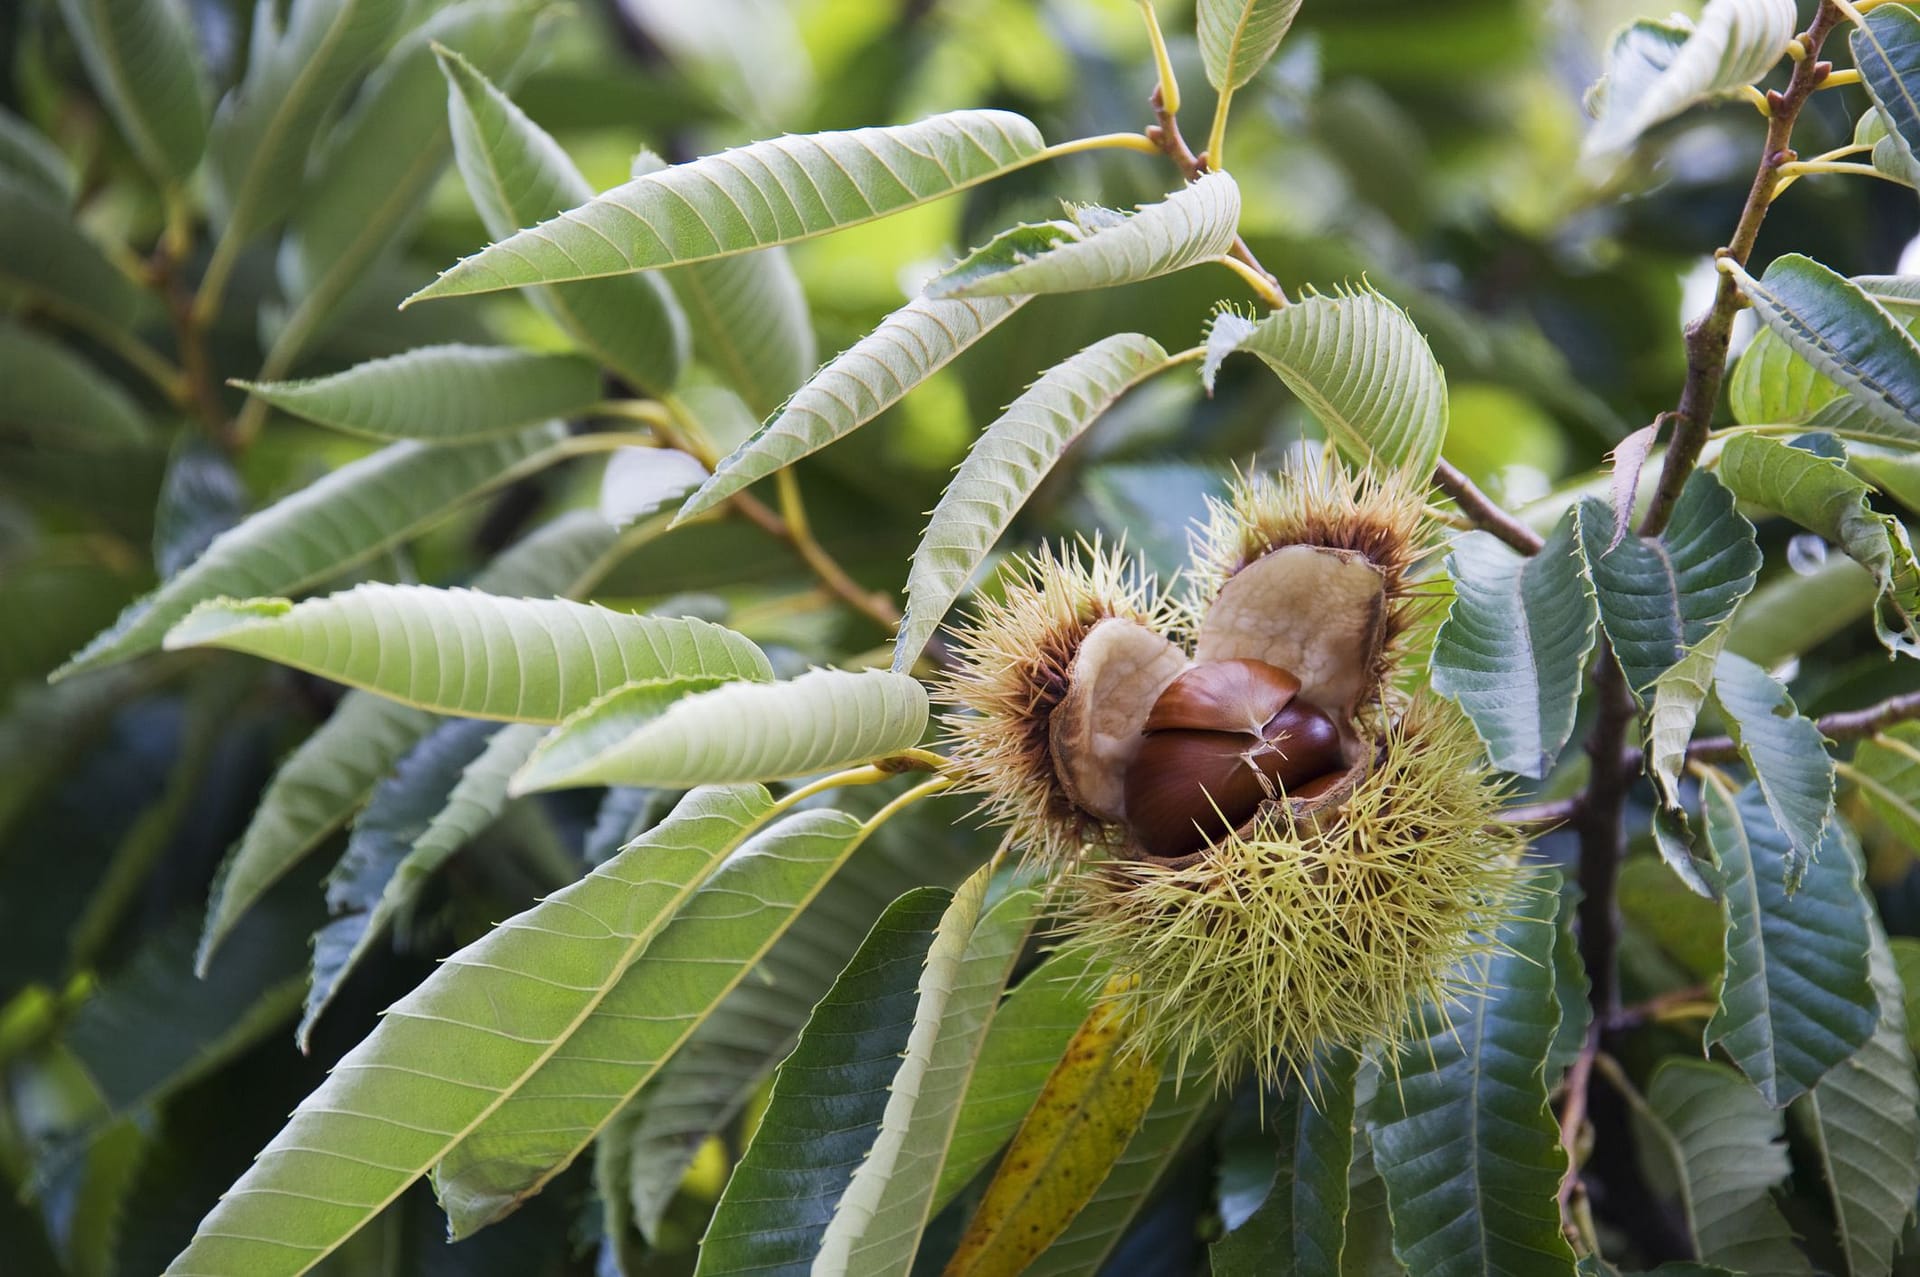 Uncovering the Truth: Why Are Chestnuts So Expensive?